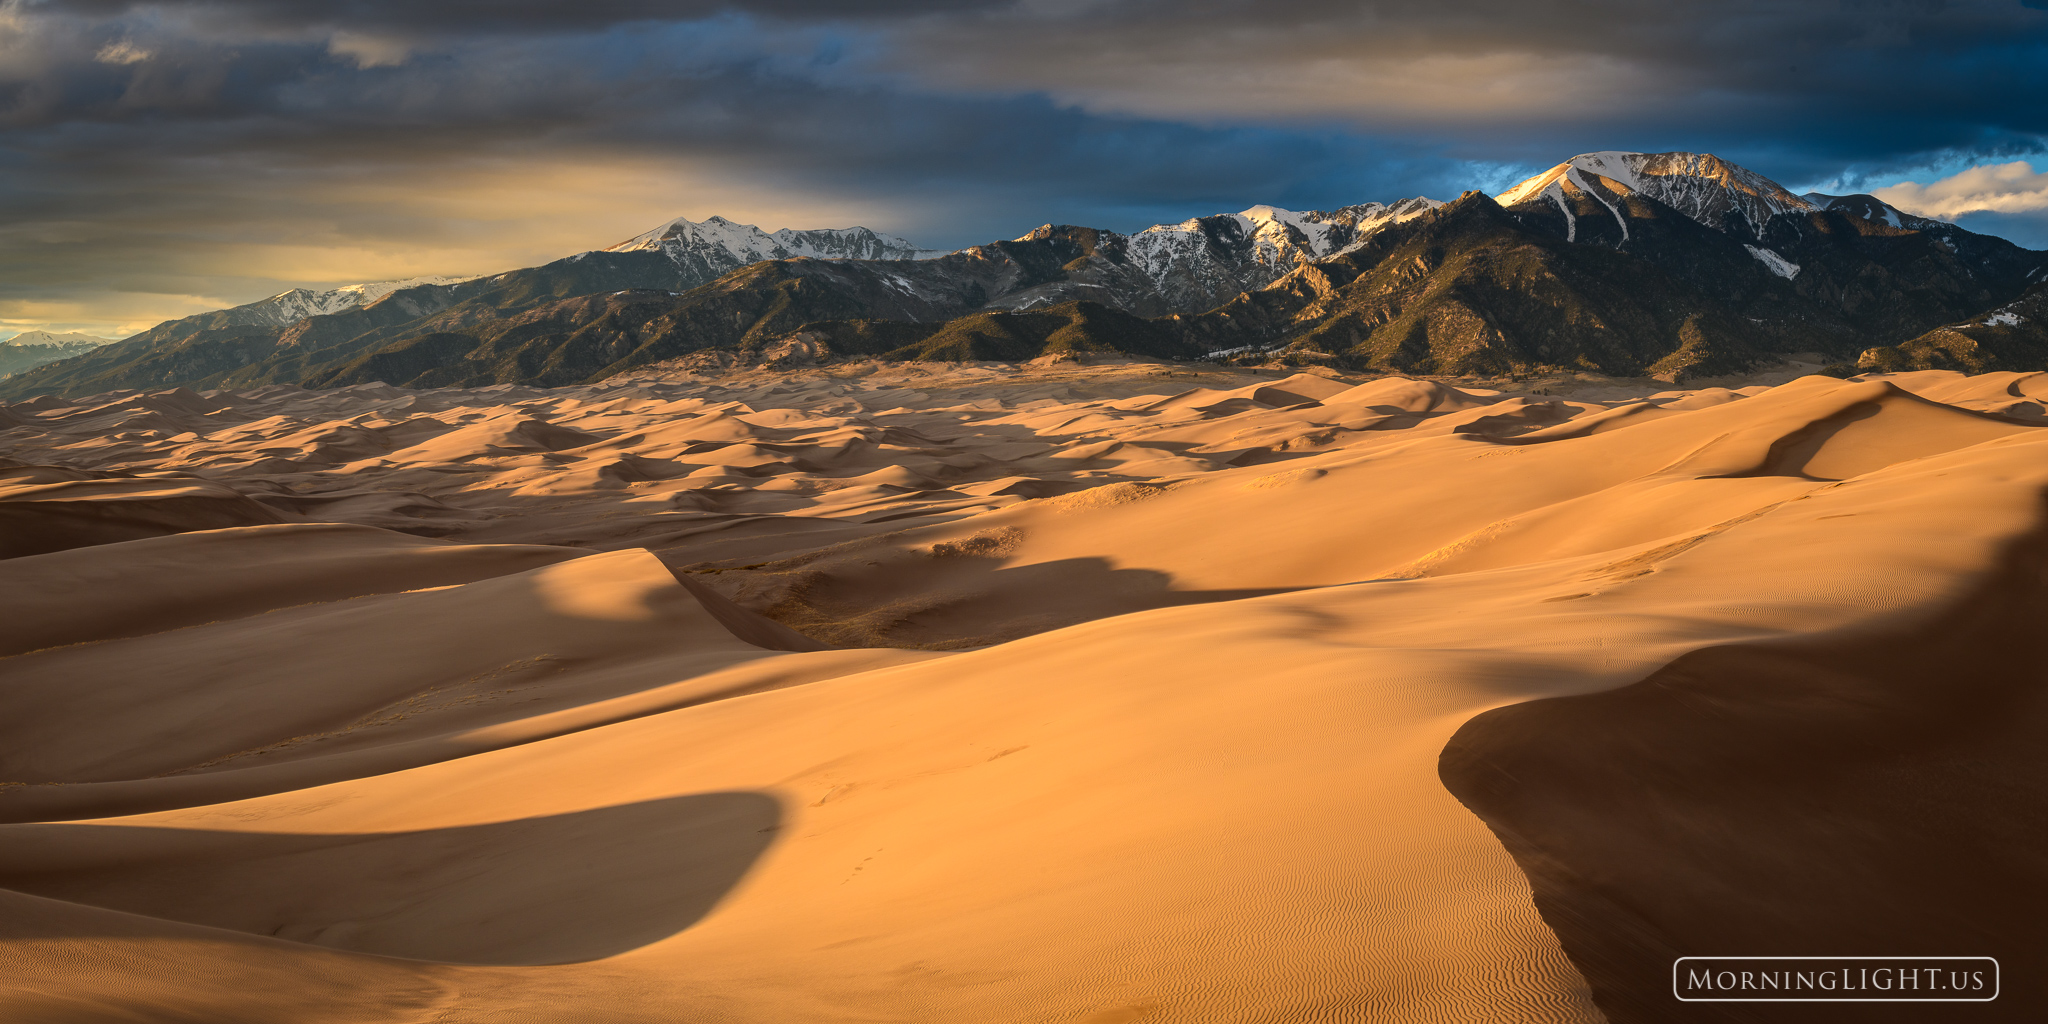 Last light touches the dunes in Great Sand Dunes National Park in Colorado. It was the perfect end to a day of exploring this...